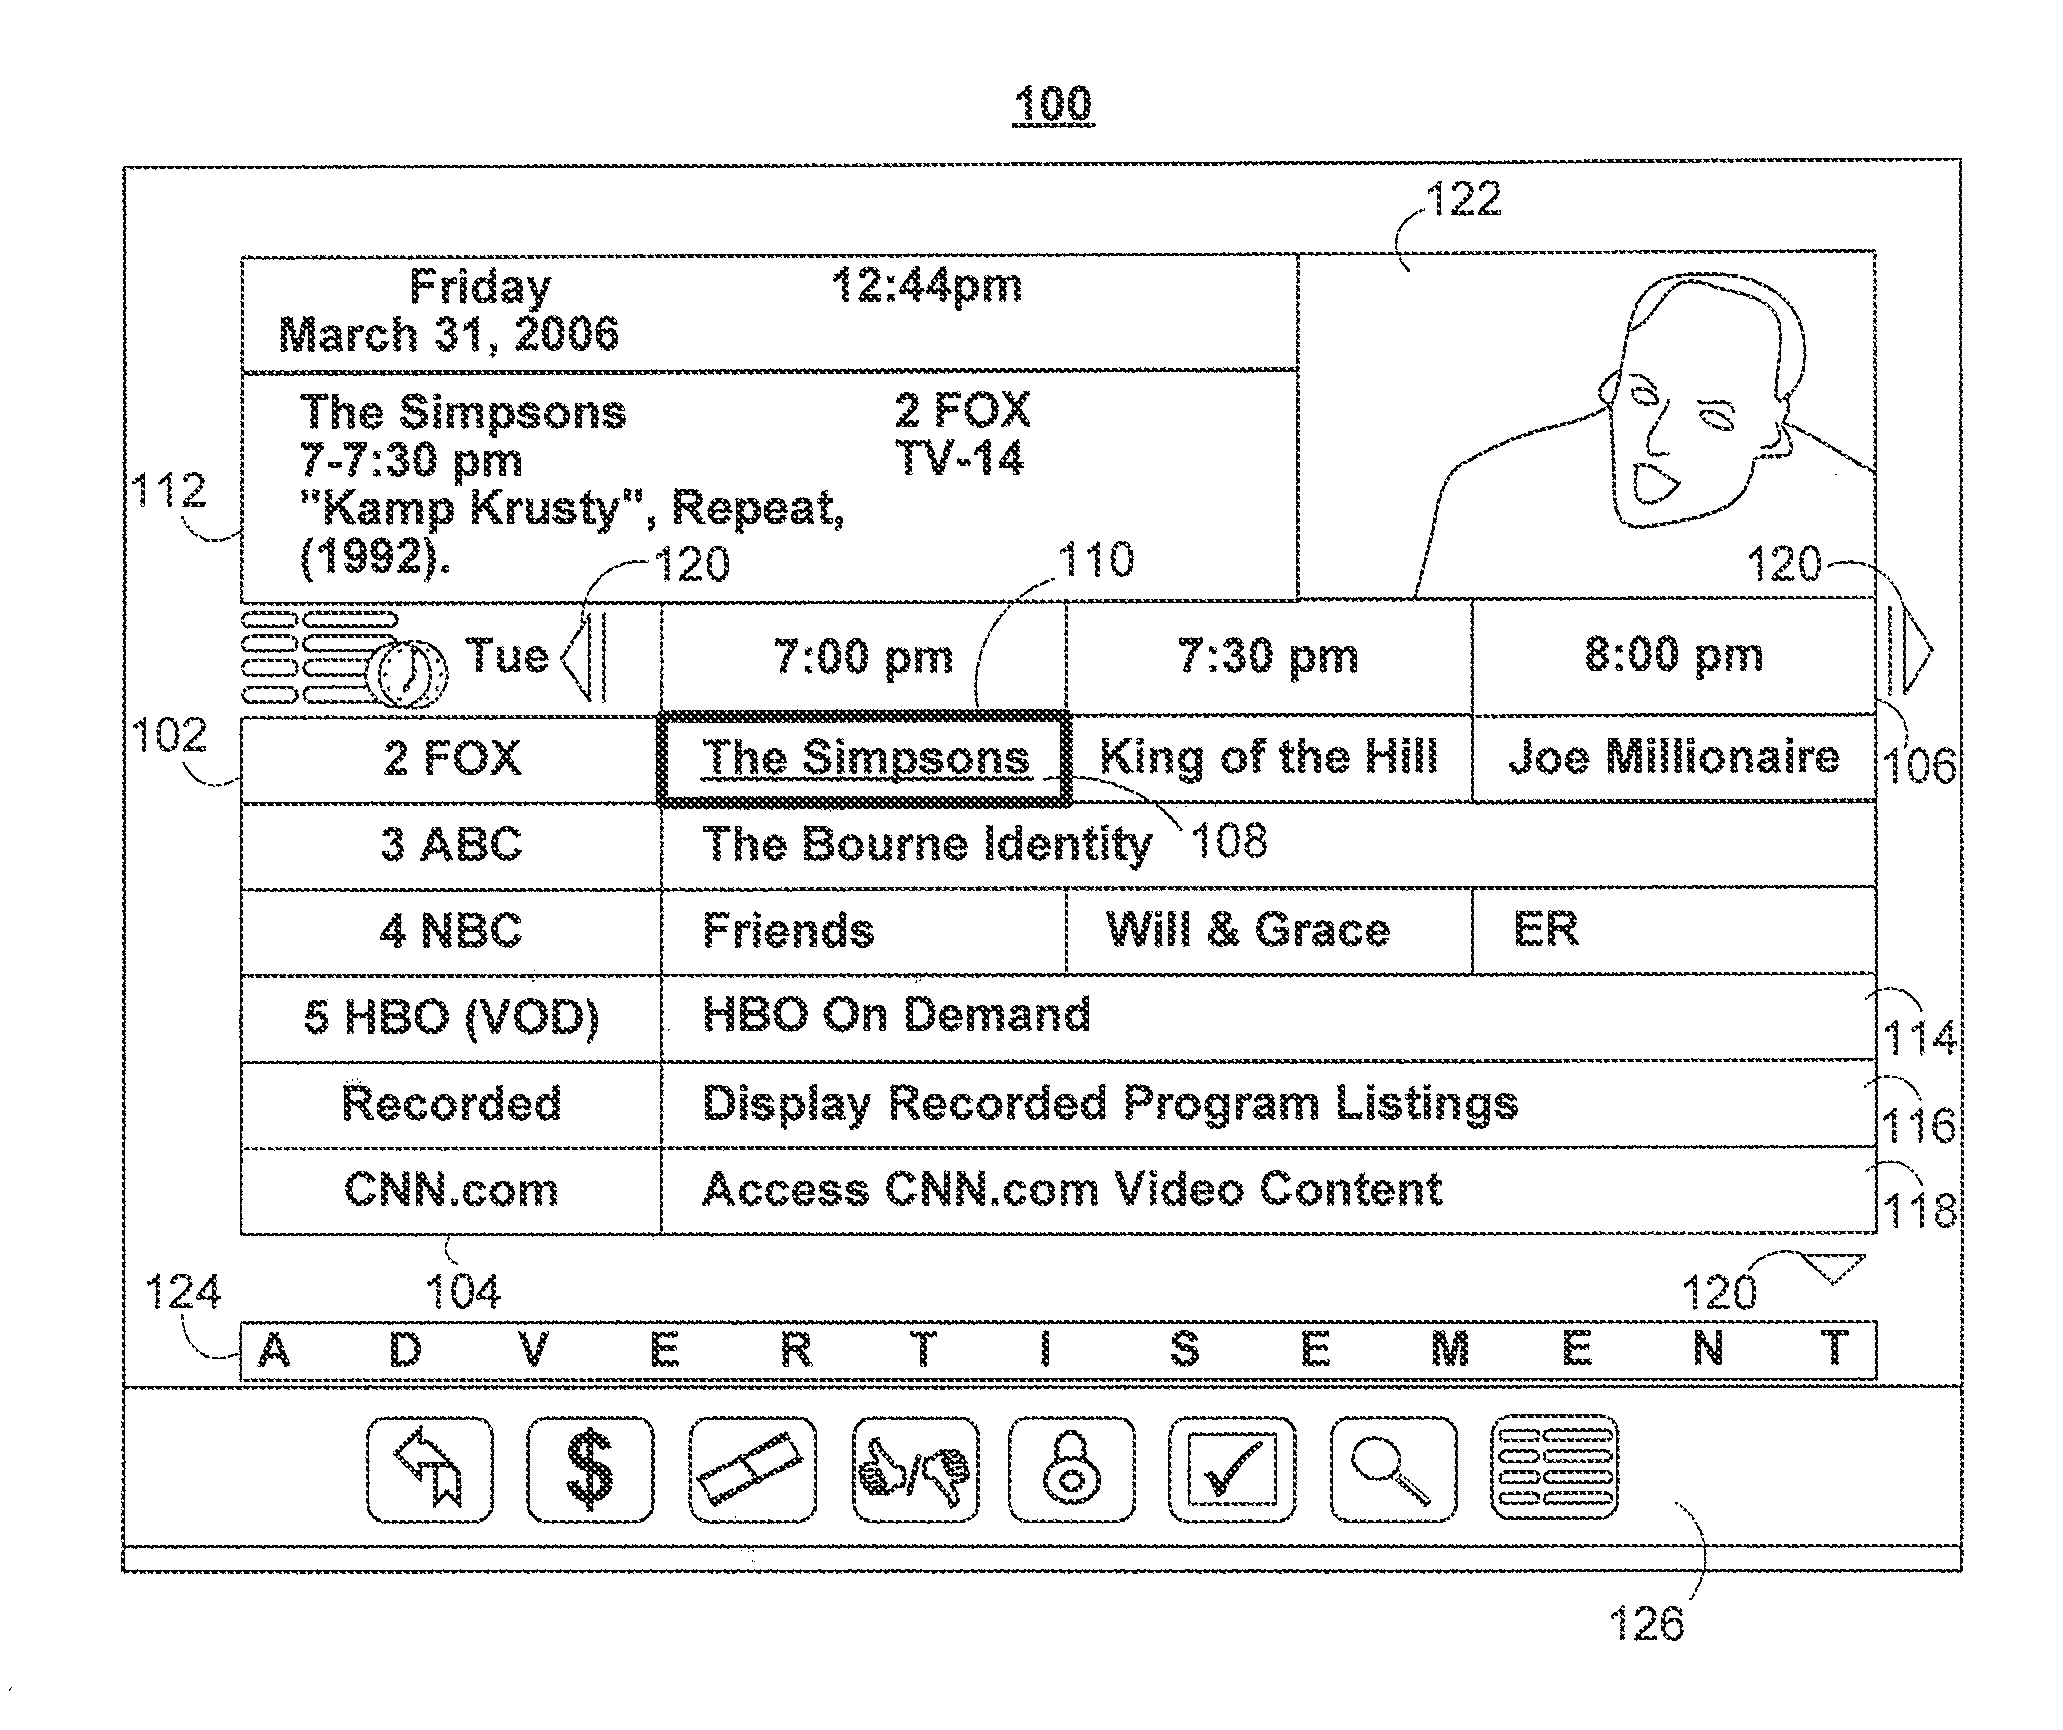 Systems and methods for generating a three-dimensional media guidance application